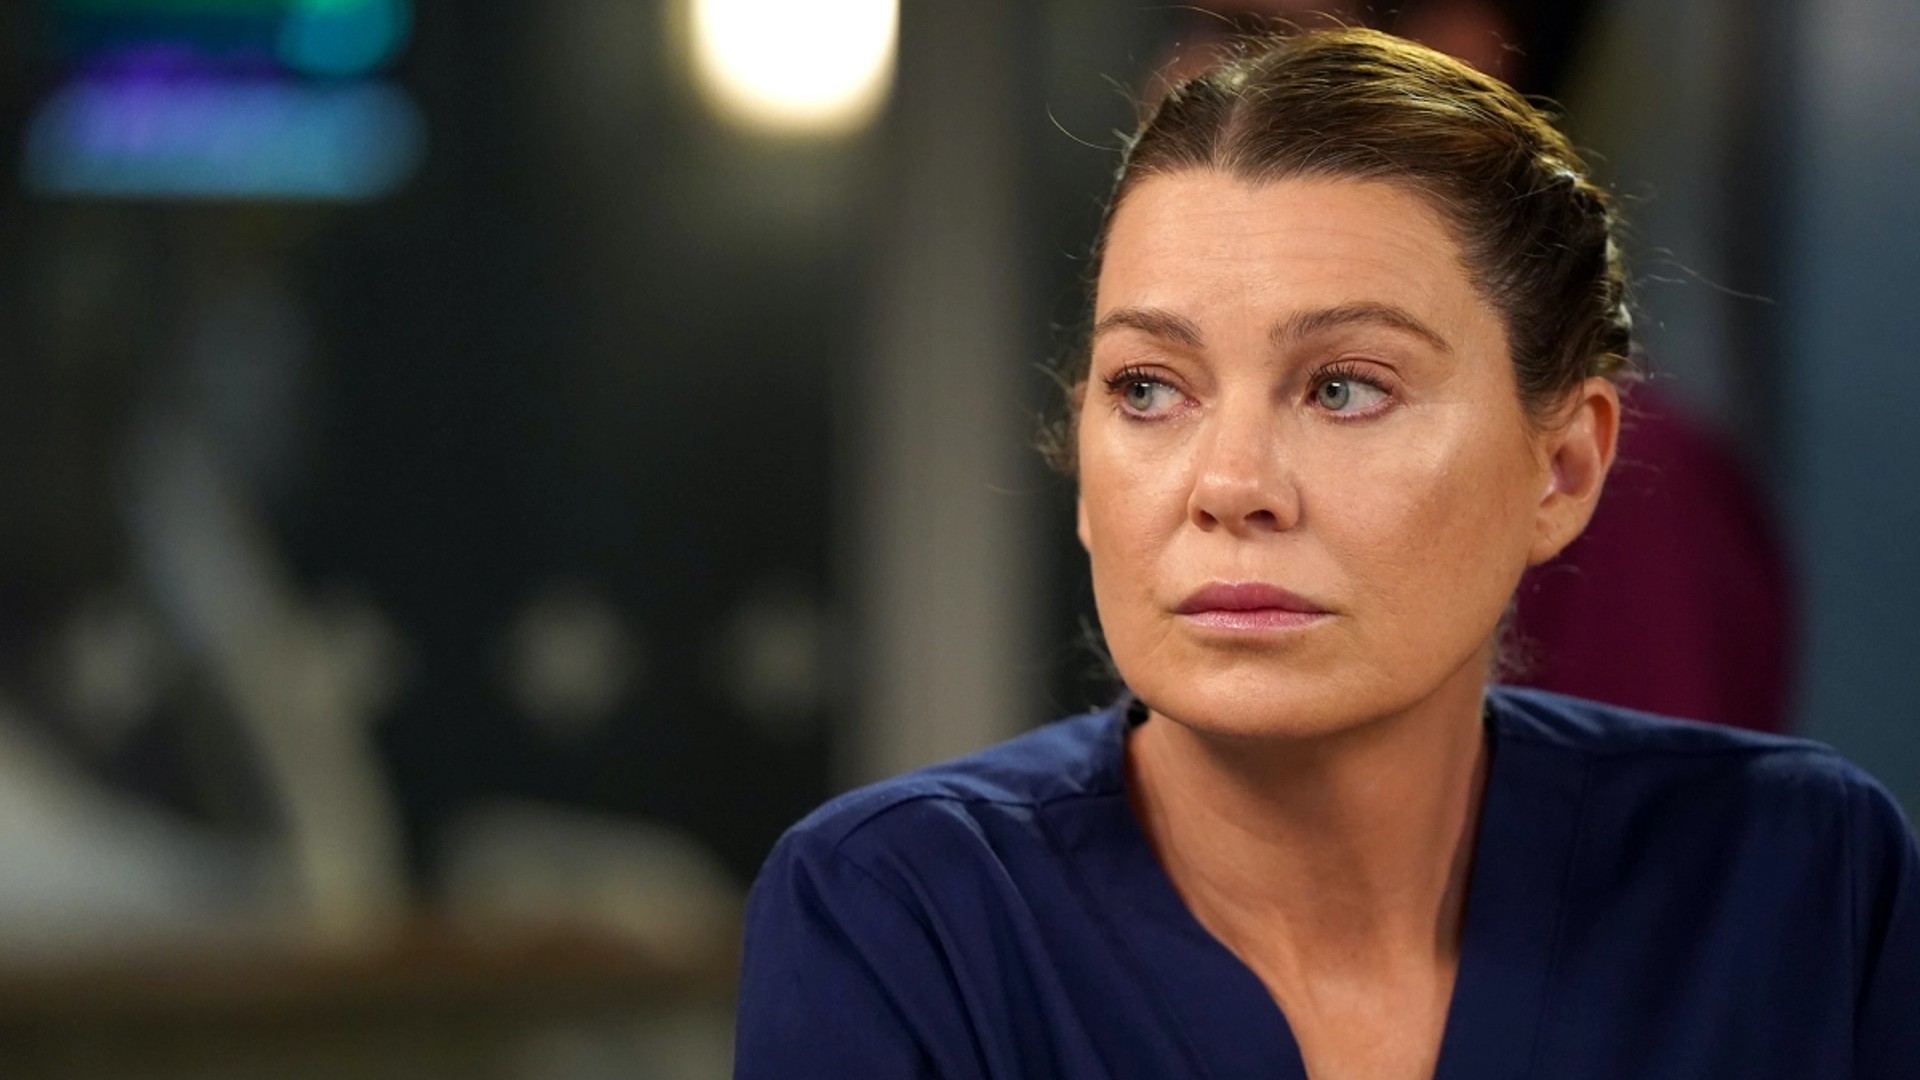 The Grey's Anatomy Episode That Changed Everything (& Not for the Better)